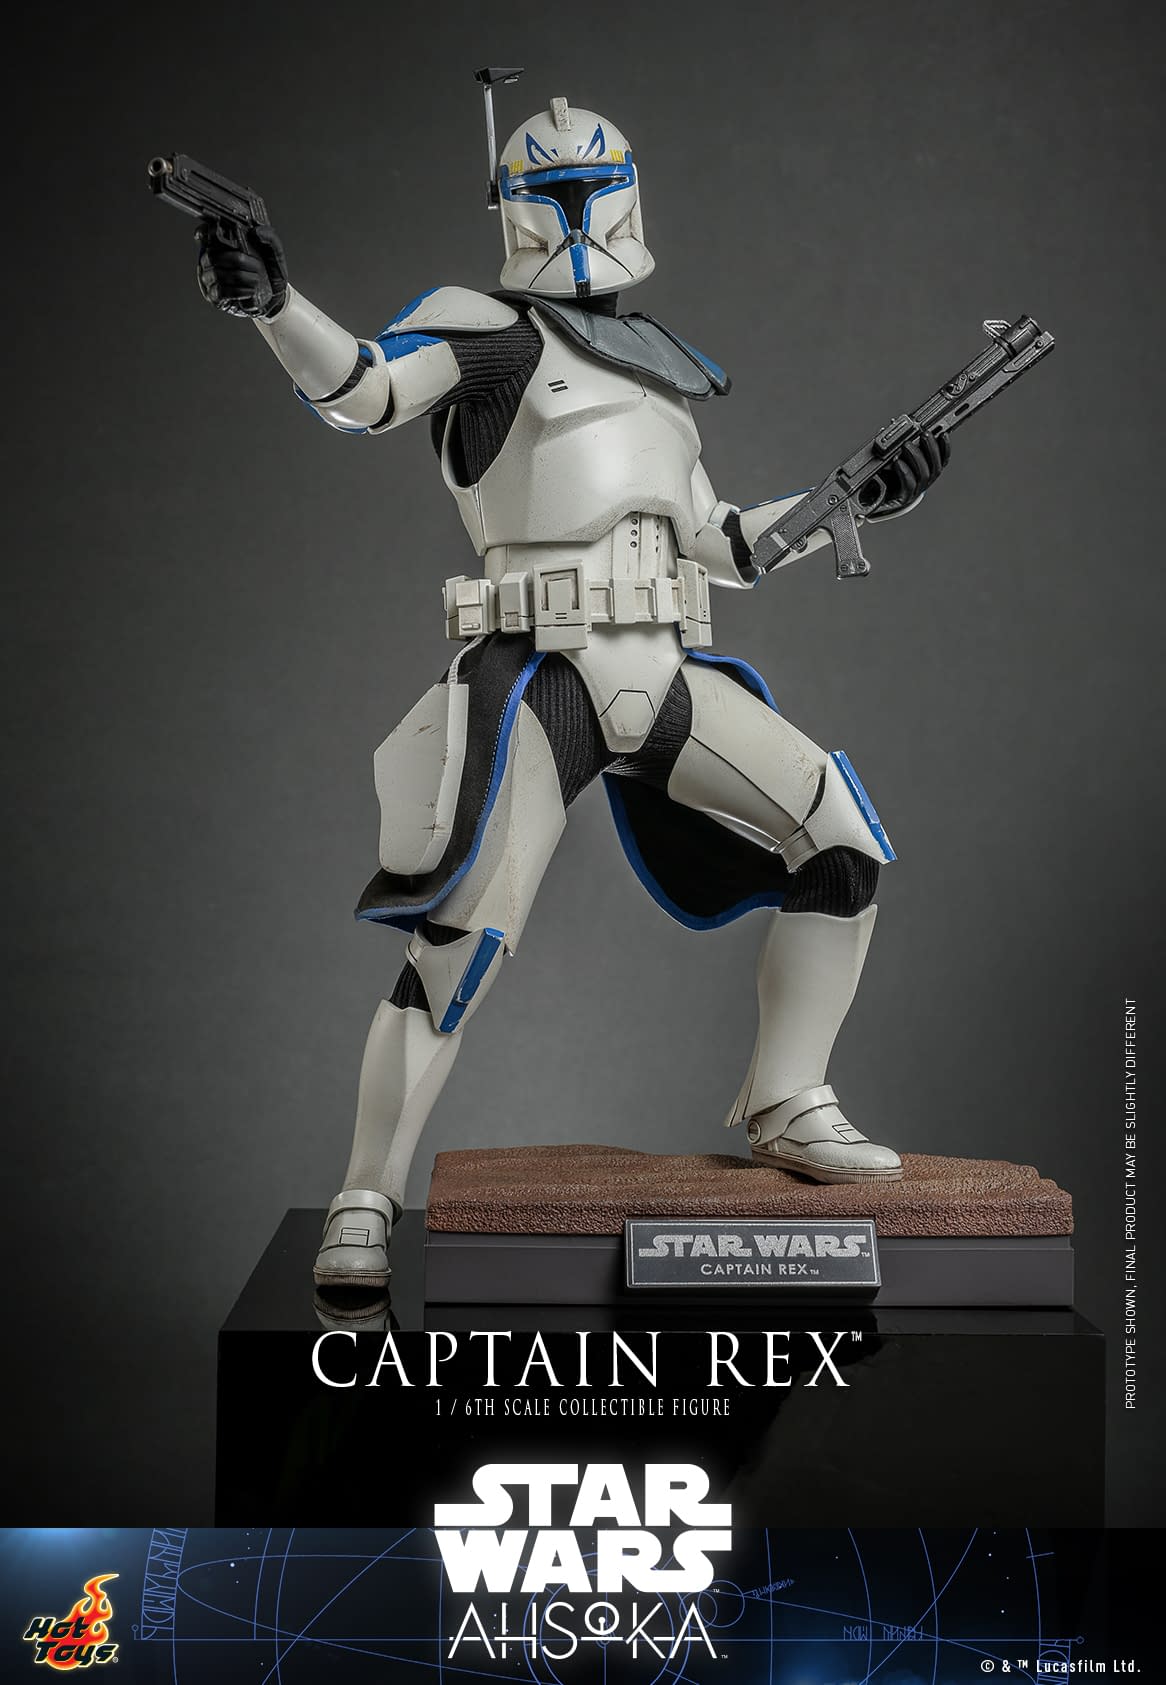 Captain Rex Returns to Hot Toys with New Star Wars 1/6 Scale Release0